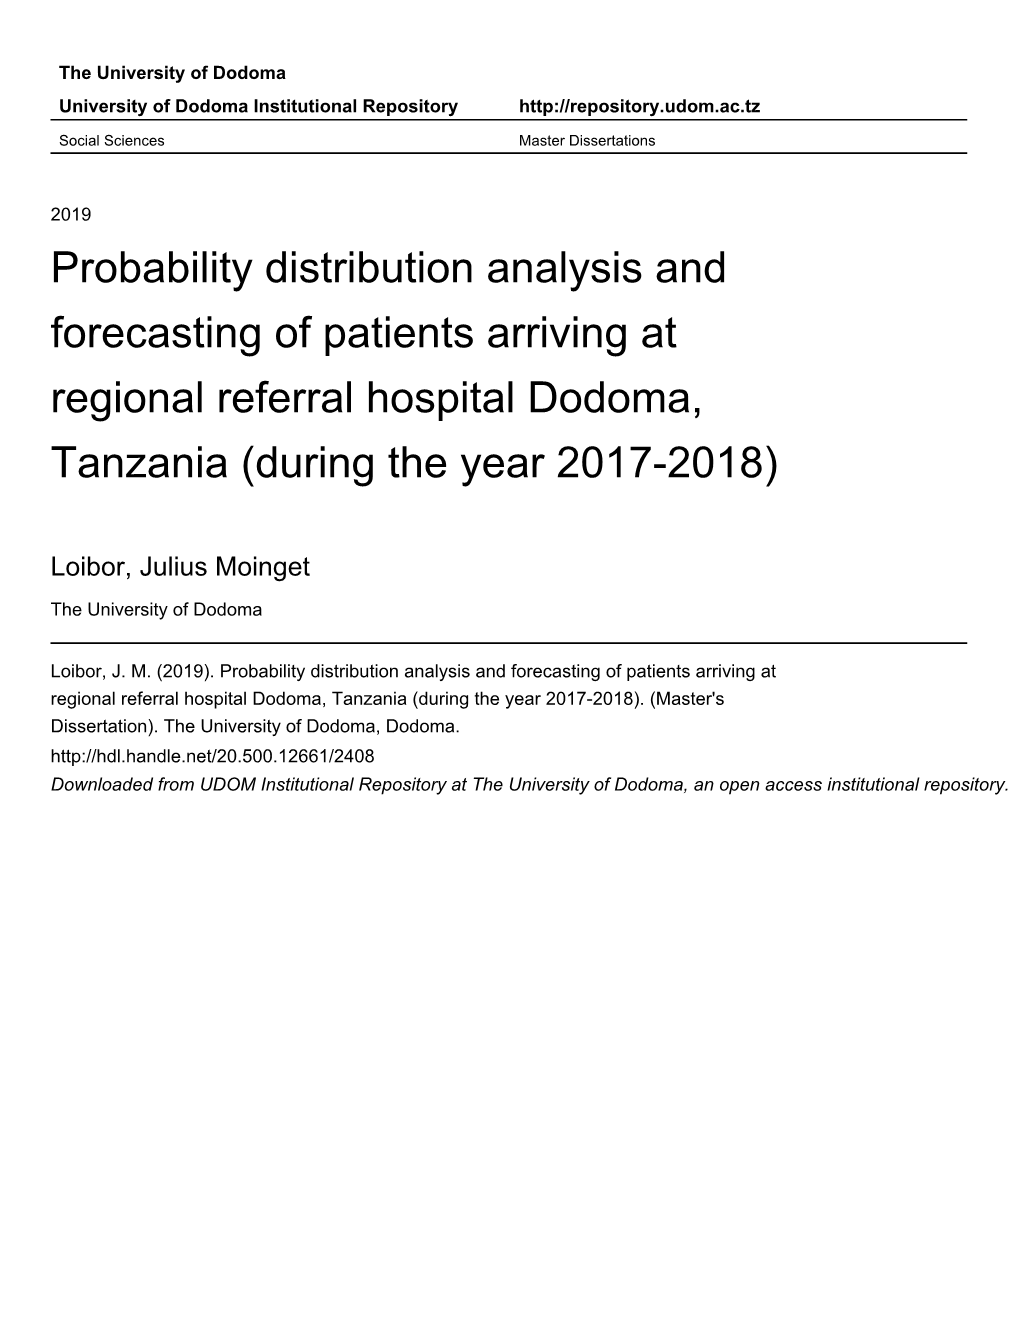 Probability Distribution Analysis and Forecasting of Patients Arriving at Regional Referral Hospital Dodoma, Tanzania (During the Year 2017-2018)